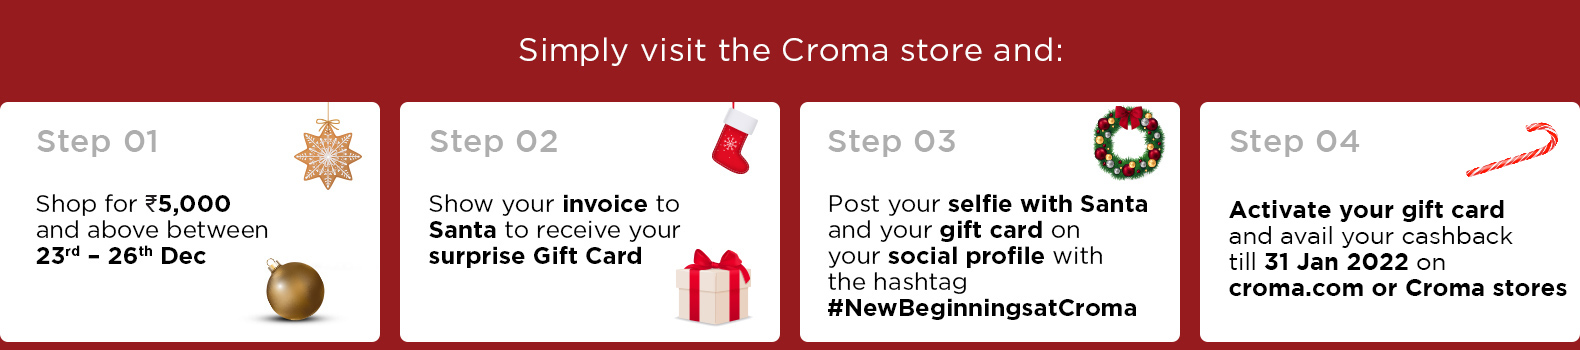 Croma Store Steps